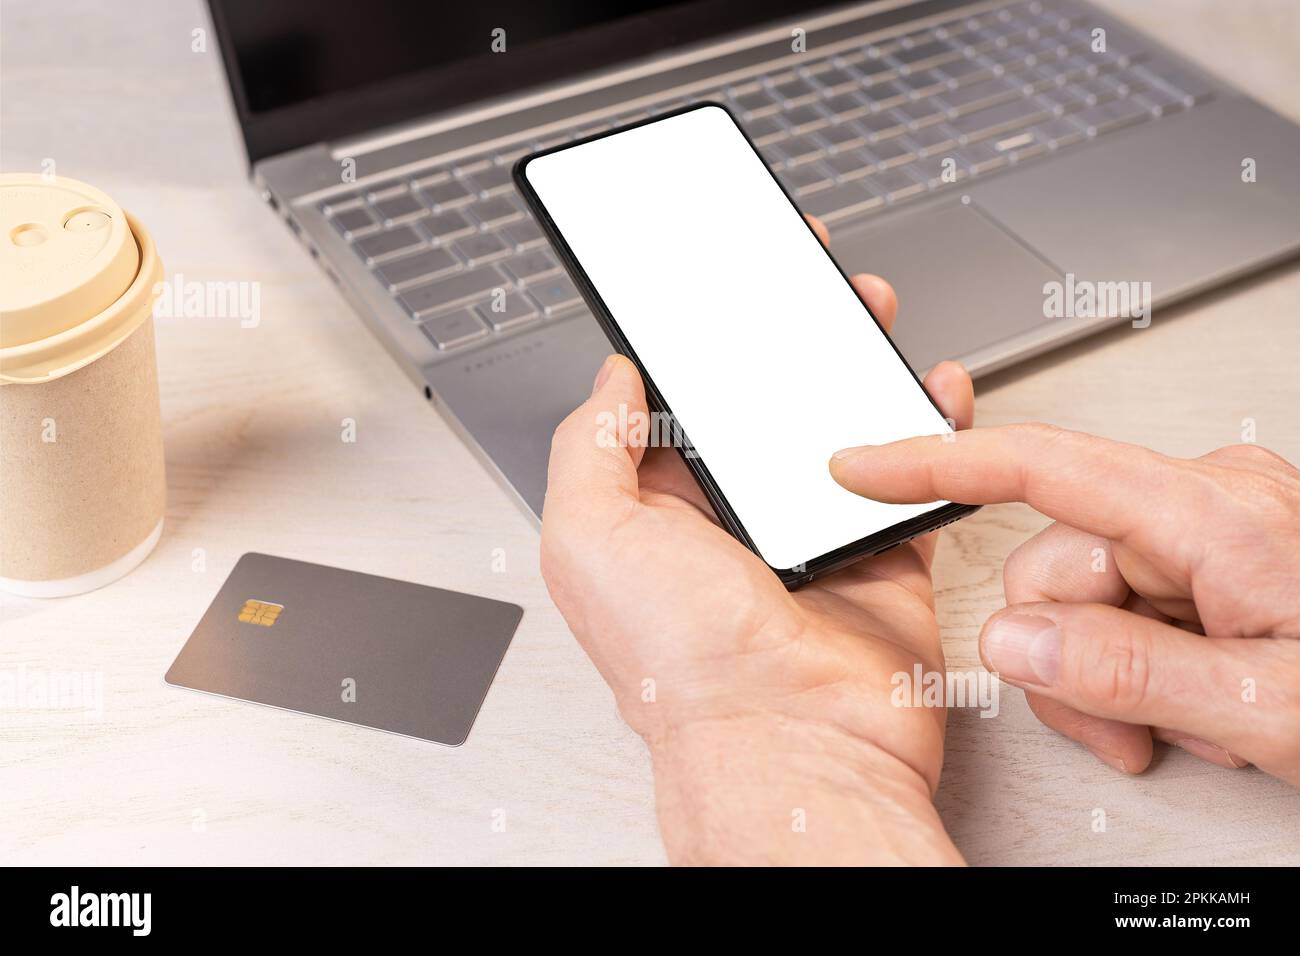 Hand holding mobile phone mockup, clicking tapping on smartphone screen frame and credit card mock-up for paying online. Bank application ad. Stock Photo